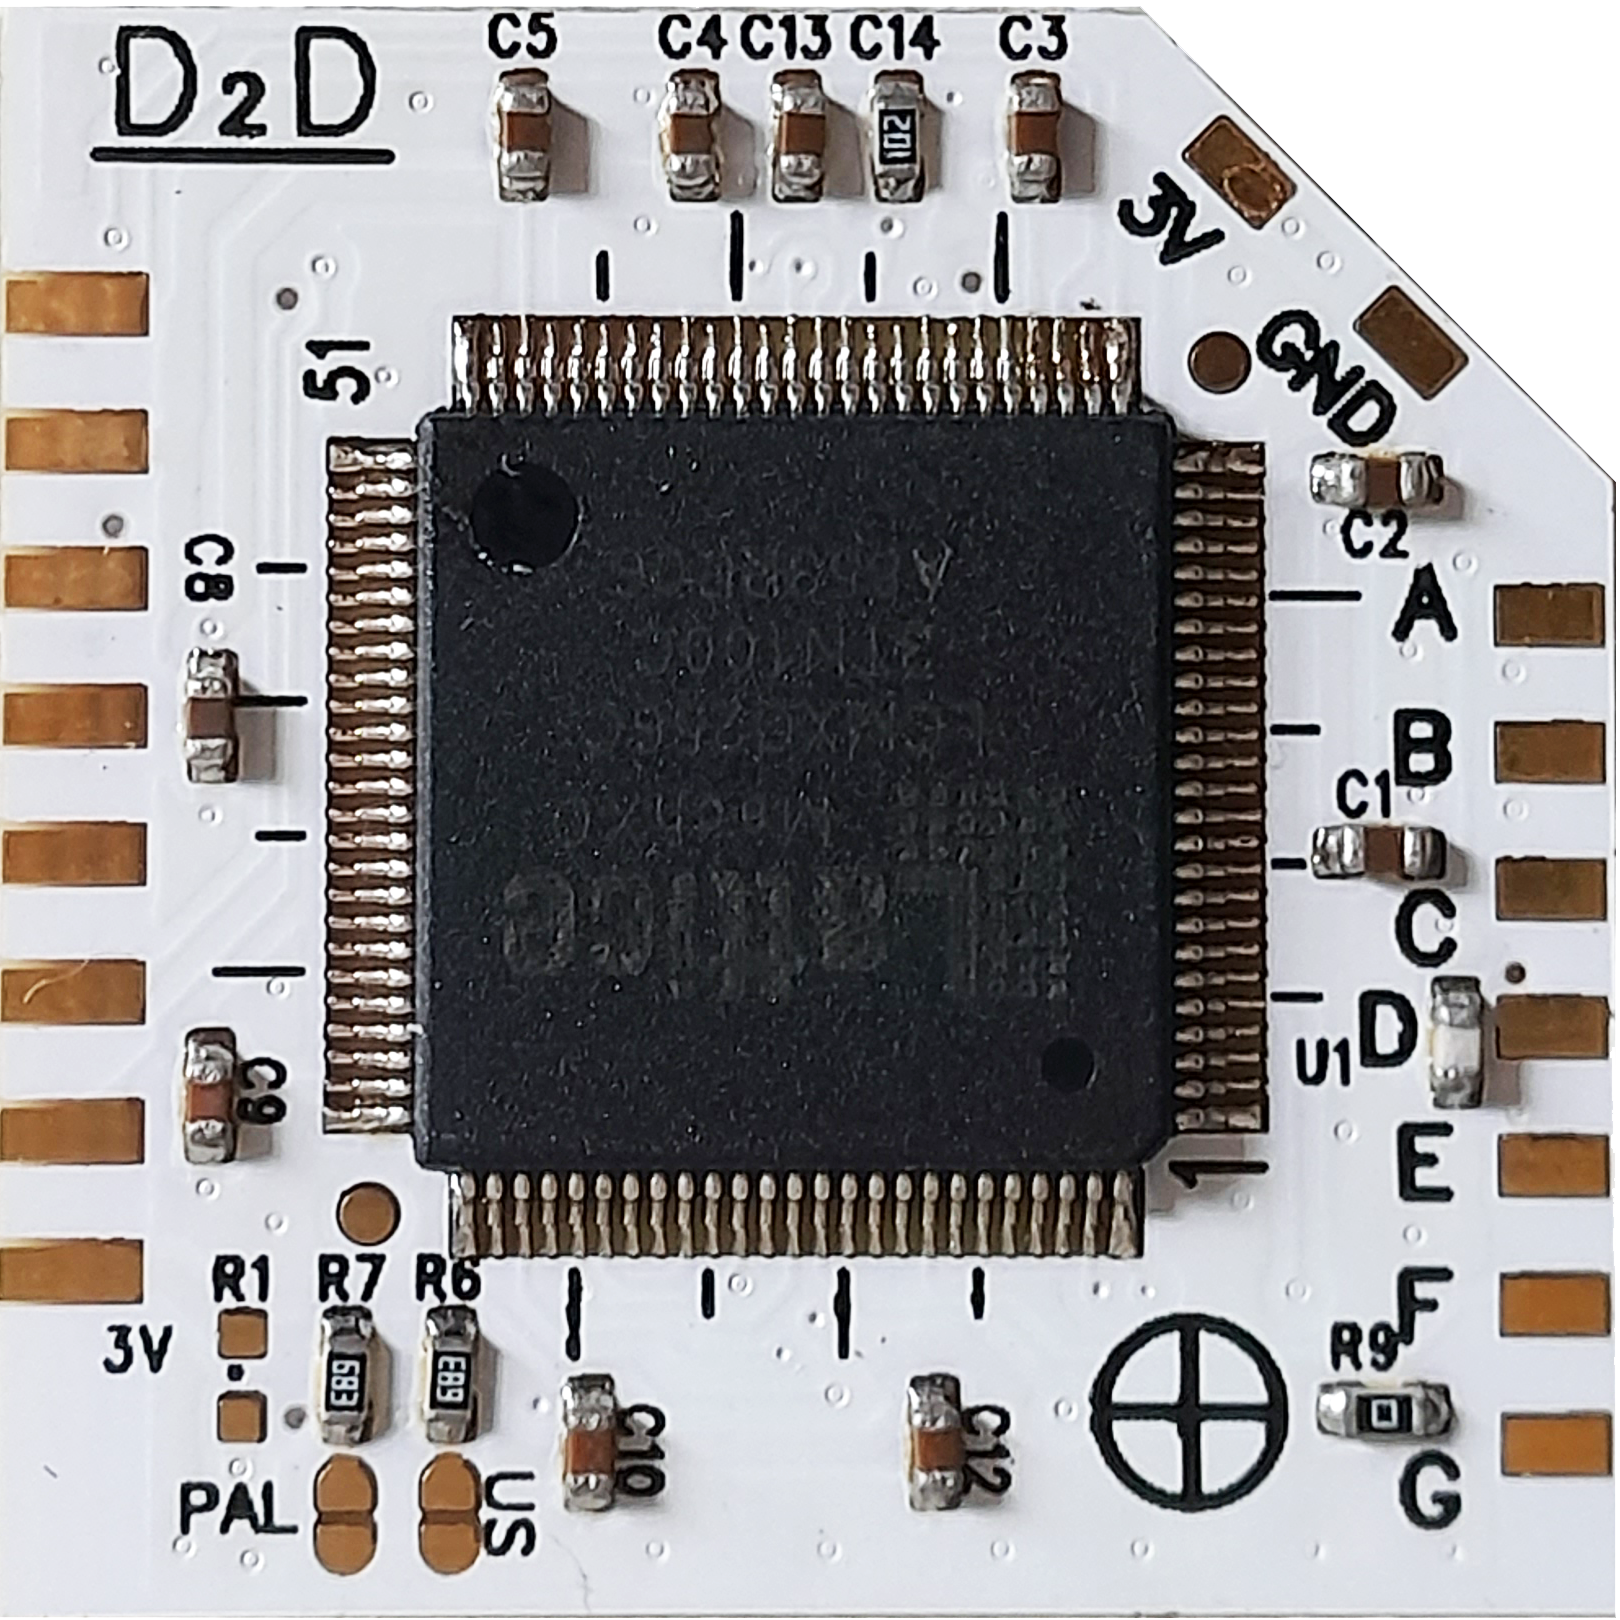 Wii Modchip Identification Guide | GBAtemp.net - The Independent Video Game  Community